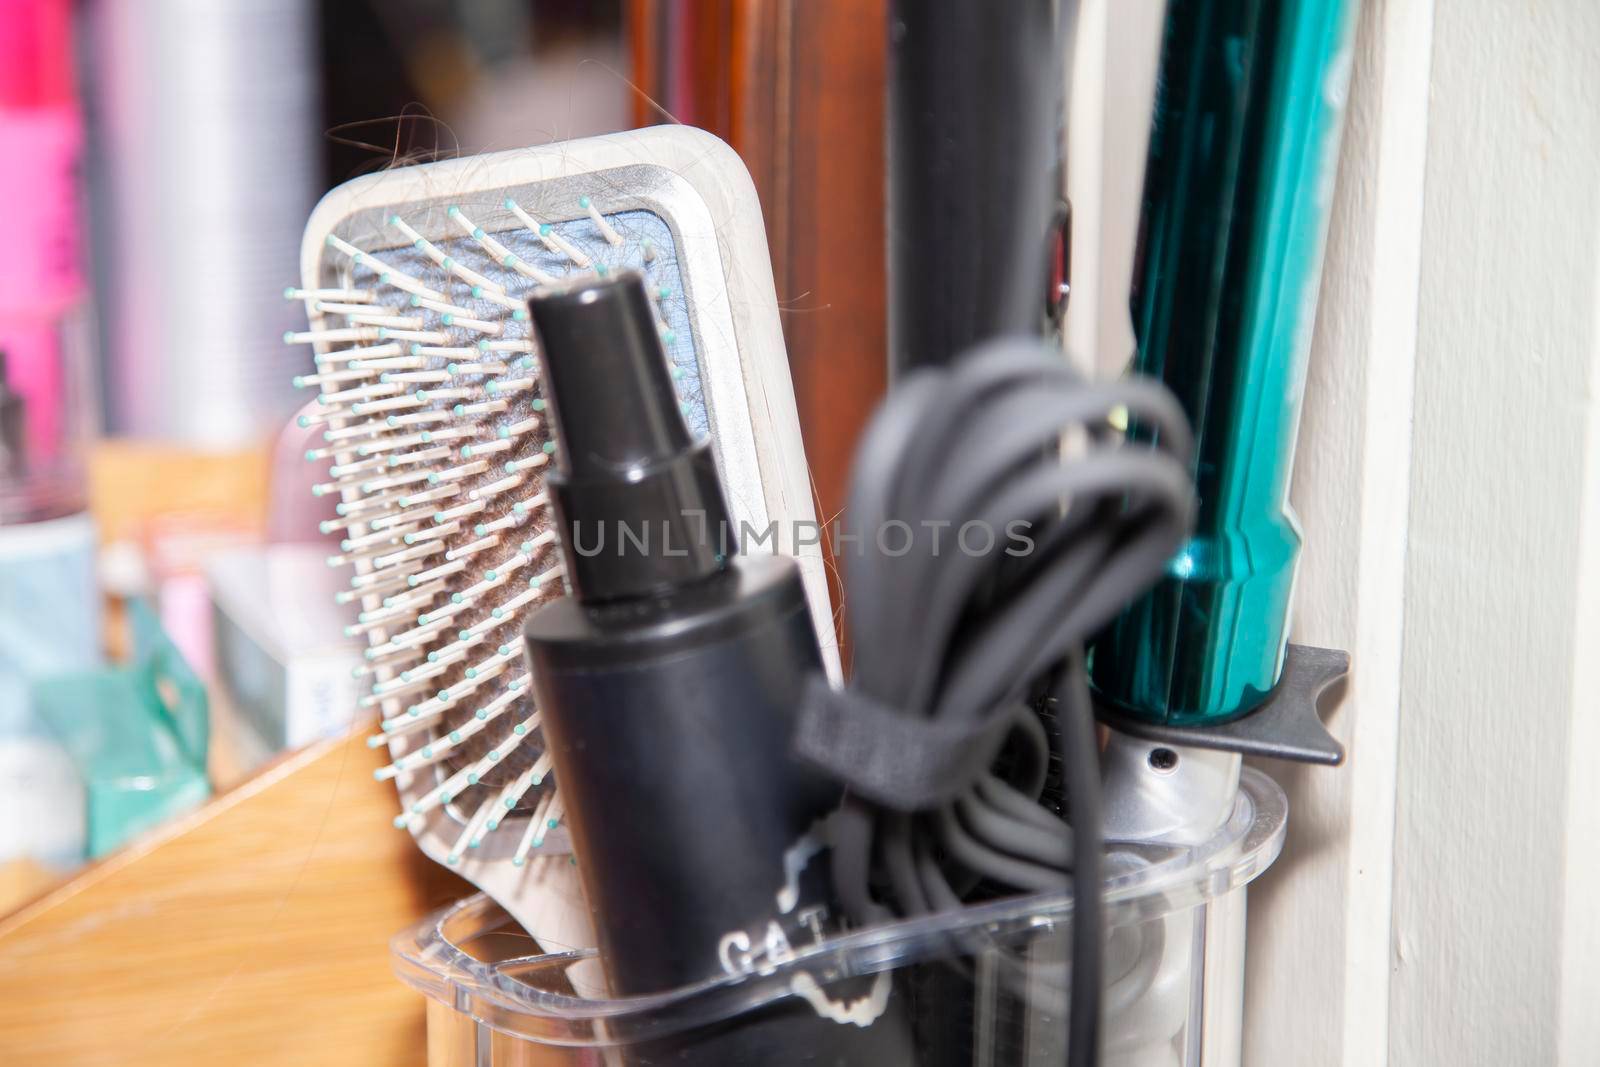 Hair brush with hair in it, spray, and styling tools with a mirror and makeup in the background